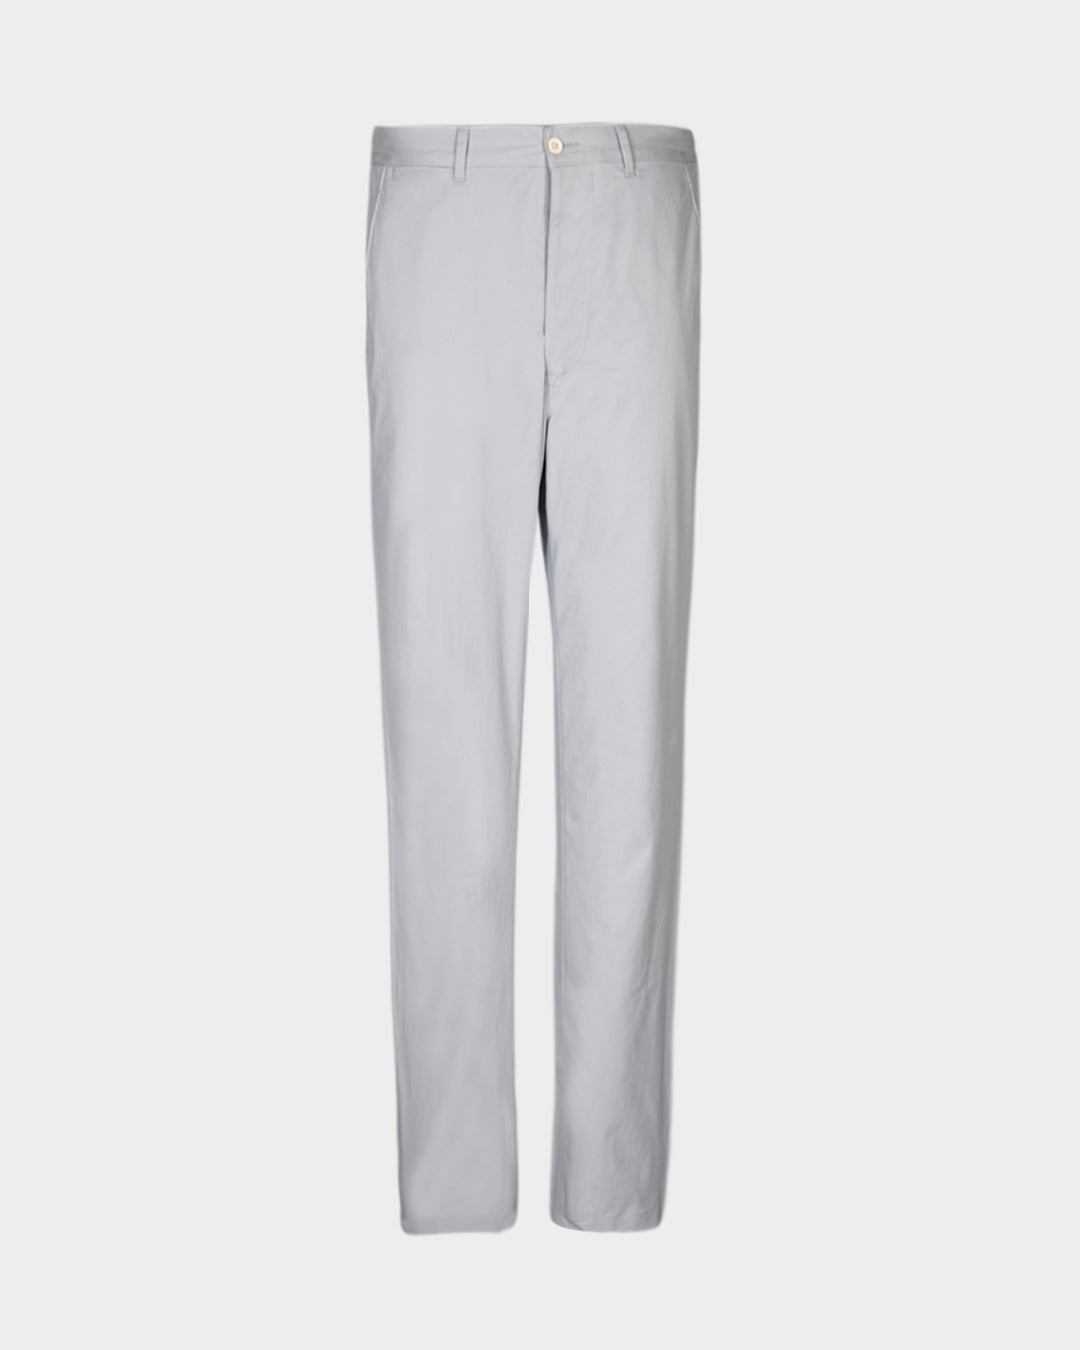 Front view of custom Genoa Chino pants for men by Luxire in light grey